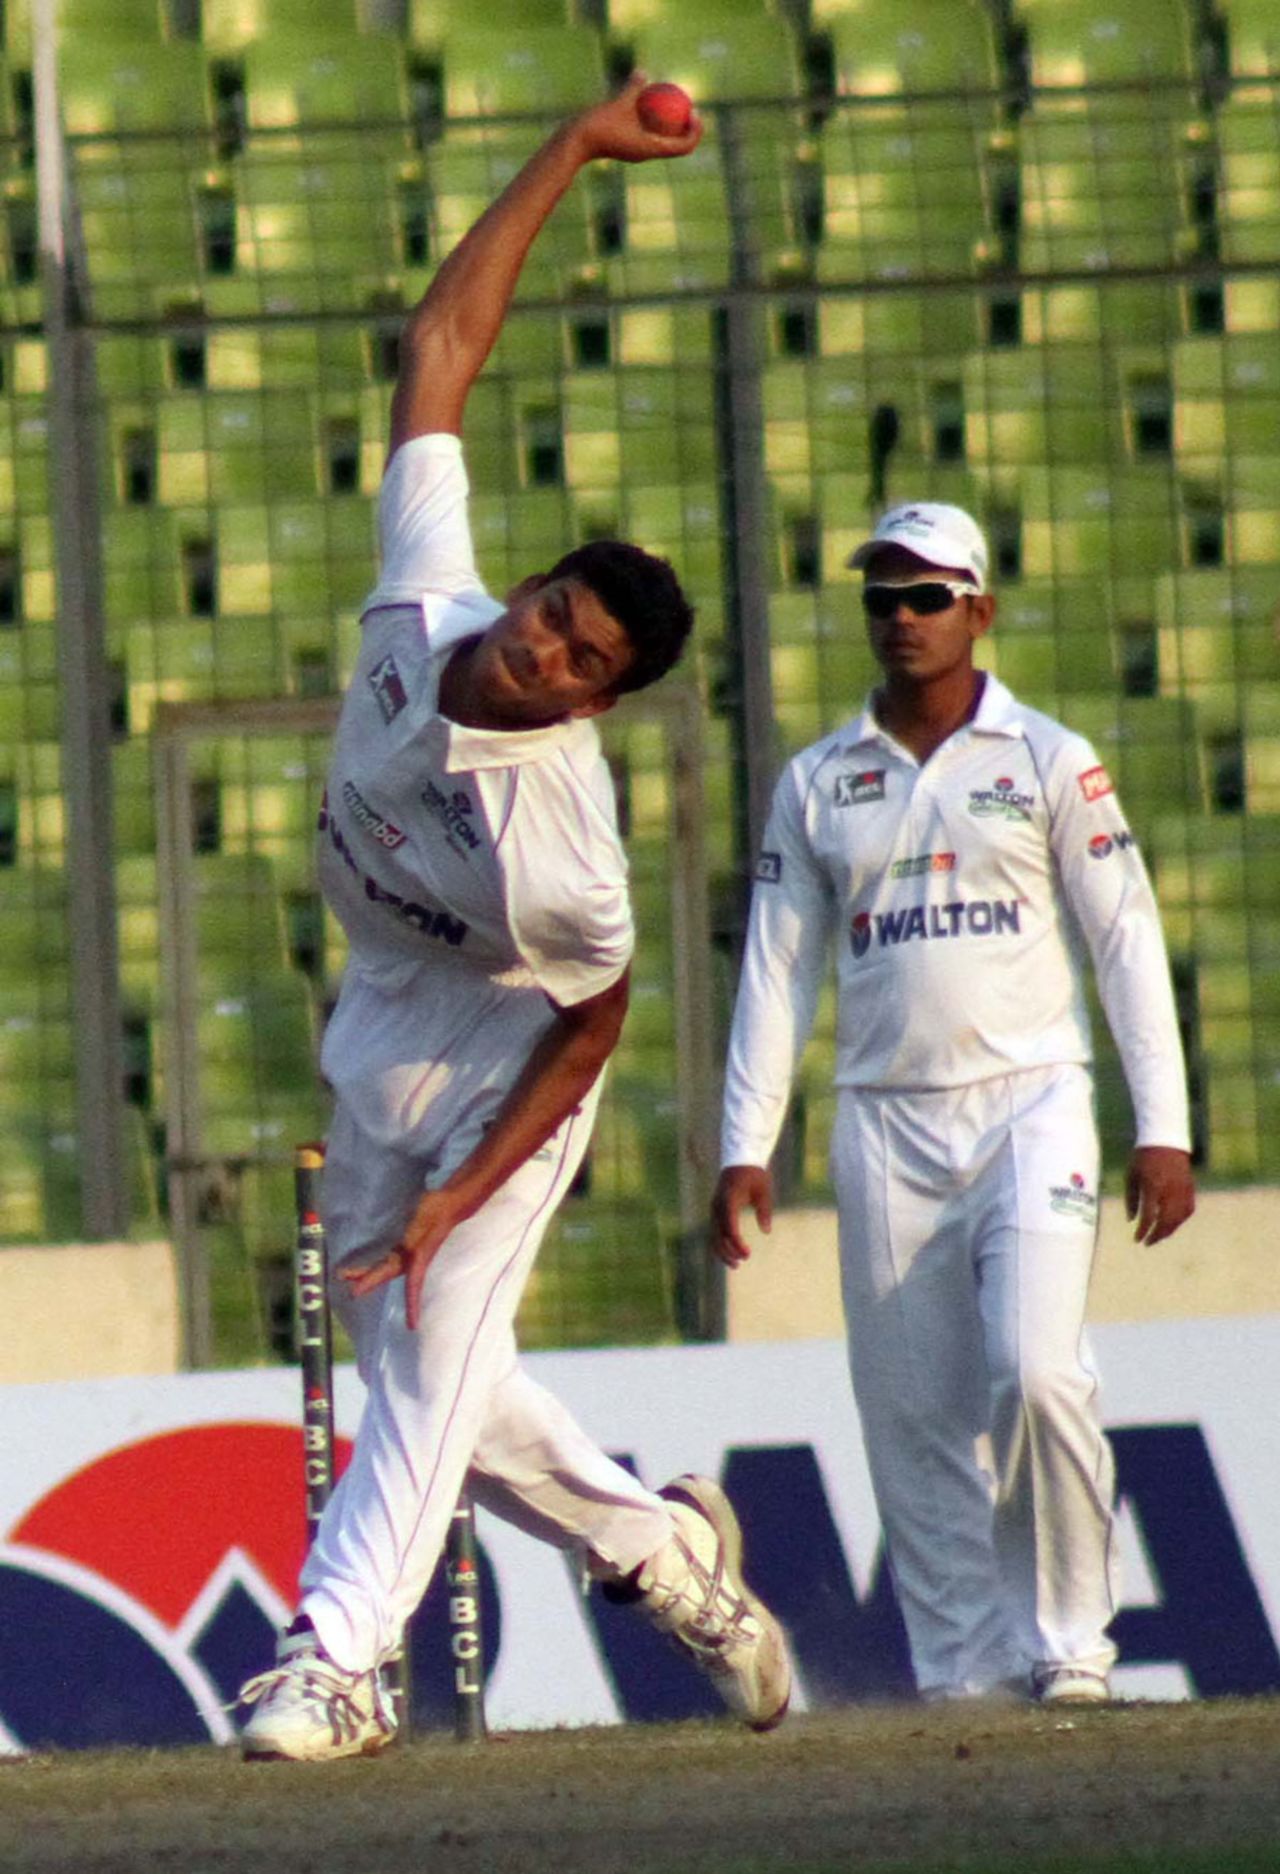 Central Zone's Taskin Ahmed in his delivery stride, Central Zone v North Zone, BCL final, Mirpur, 2nd day, February 23, 2012